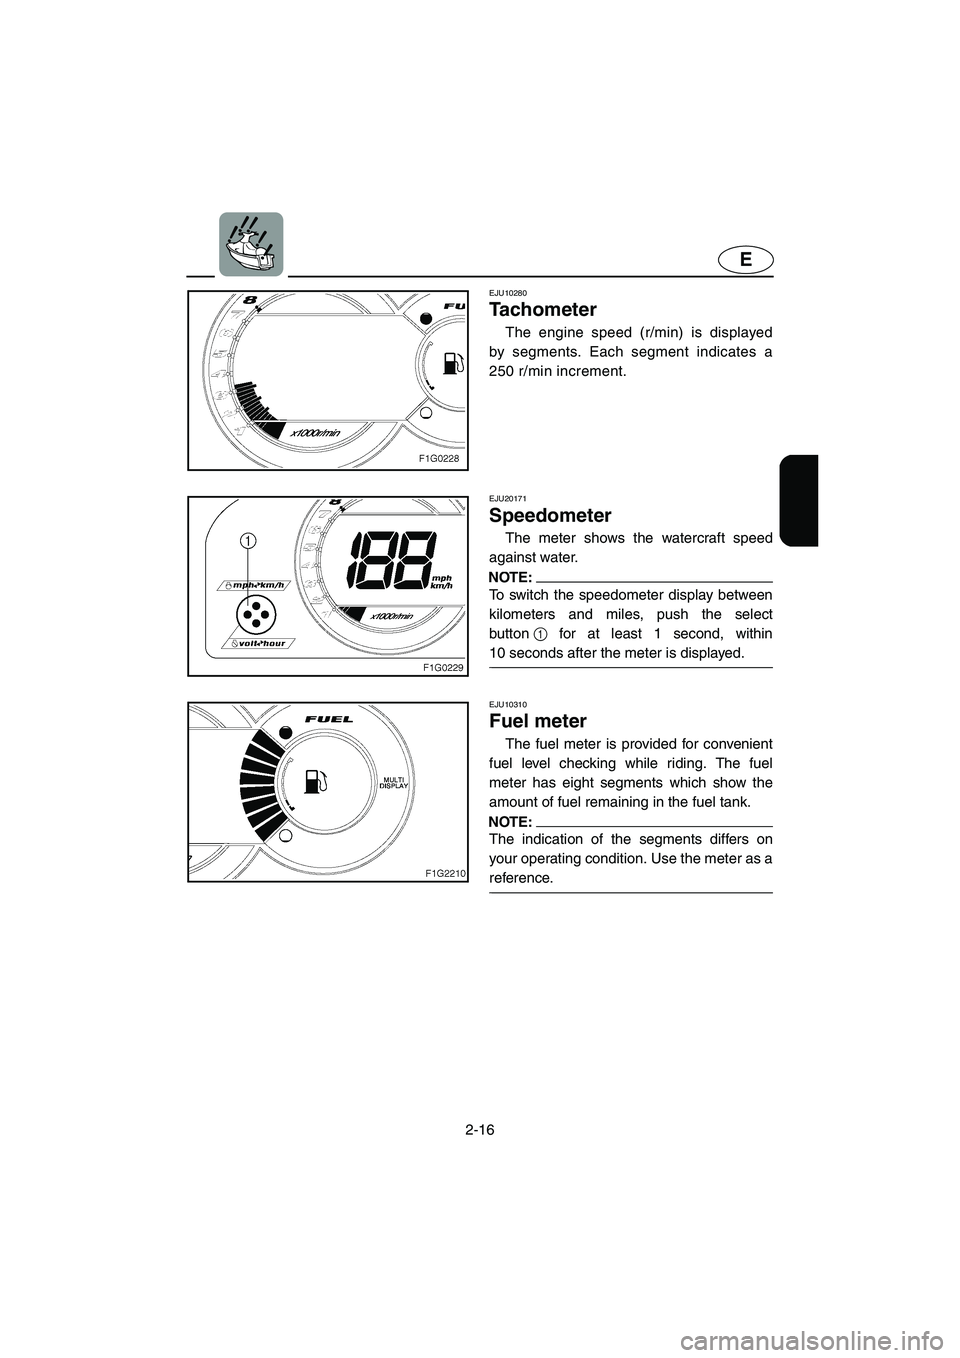 YAMAHA GP1300R 2003 Service Manual 2-16
E
EJU10280 
Tachometer  
The engine speed (r/min) is displayed
by segments. Each segment indicates a
250 r/min increment. 
EJU20171 
Speedometer 
The meter shows the watercraft speed
against wate